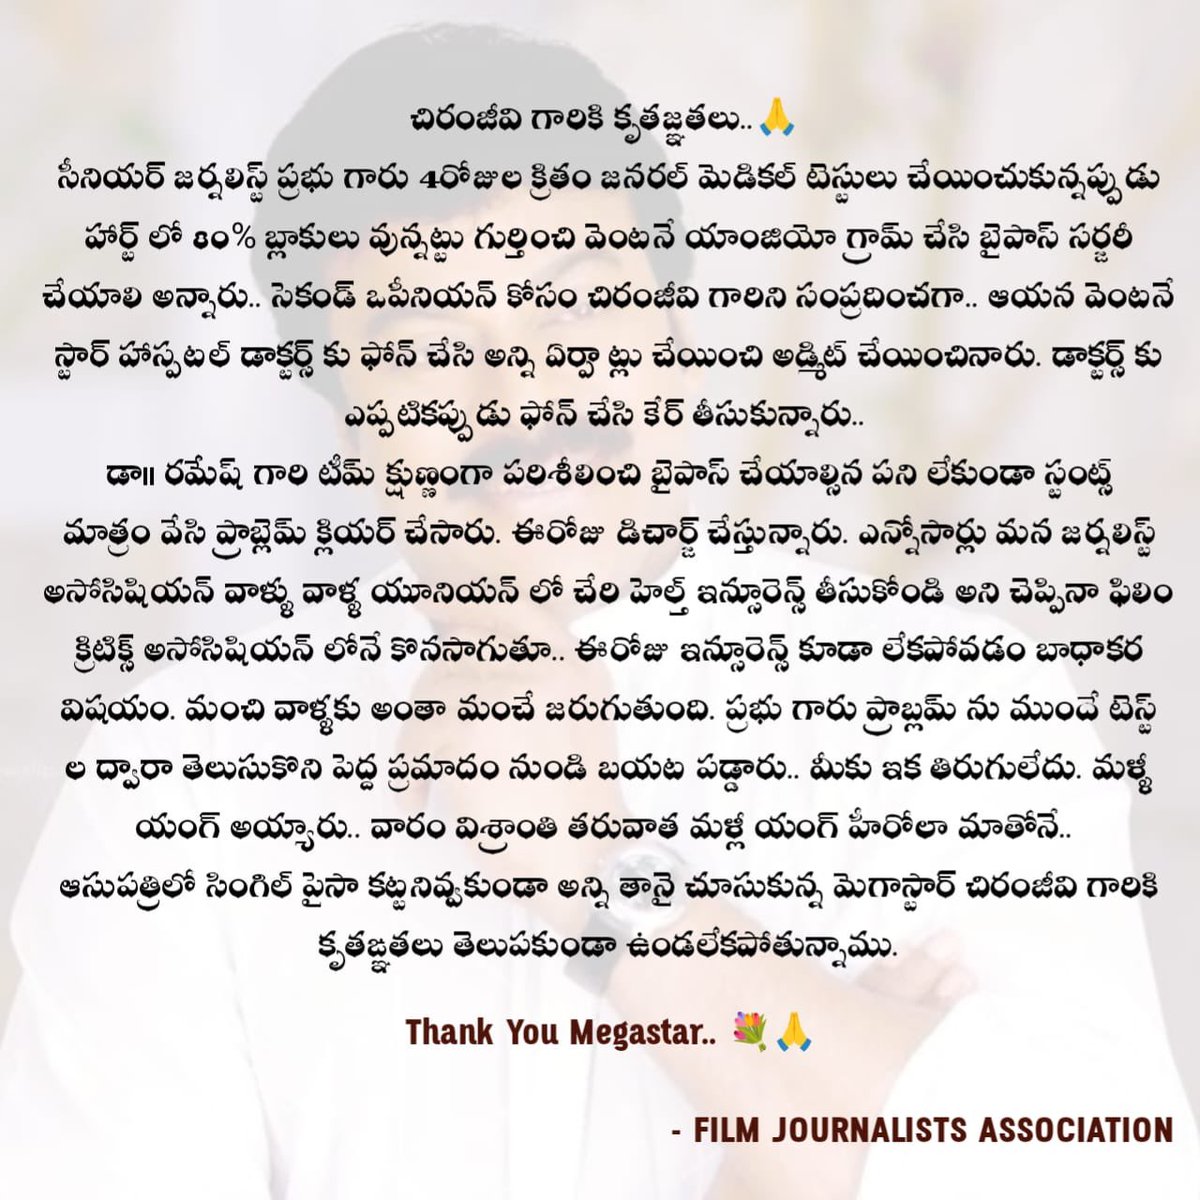 Once again, our #Boss #Megastar @KChiruTweets exhibited his generosity towards journalist Prabu, setting a positive example for others to follow.